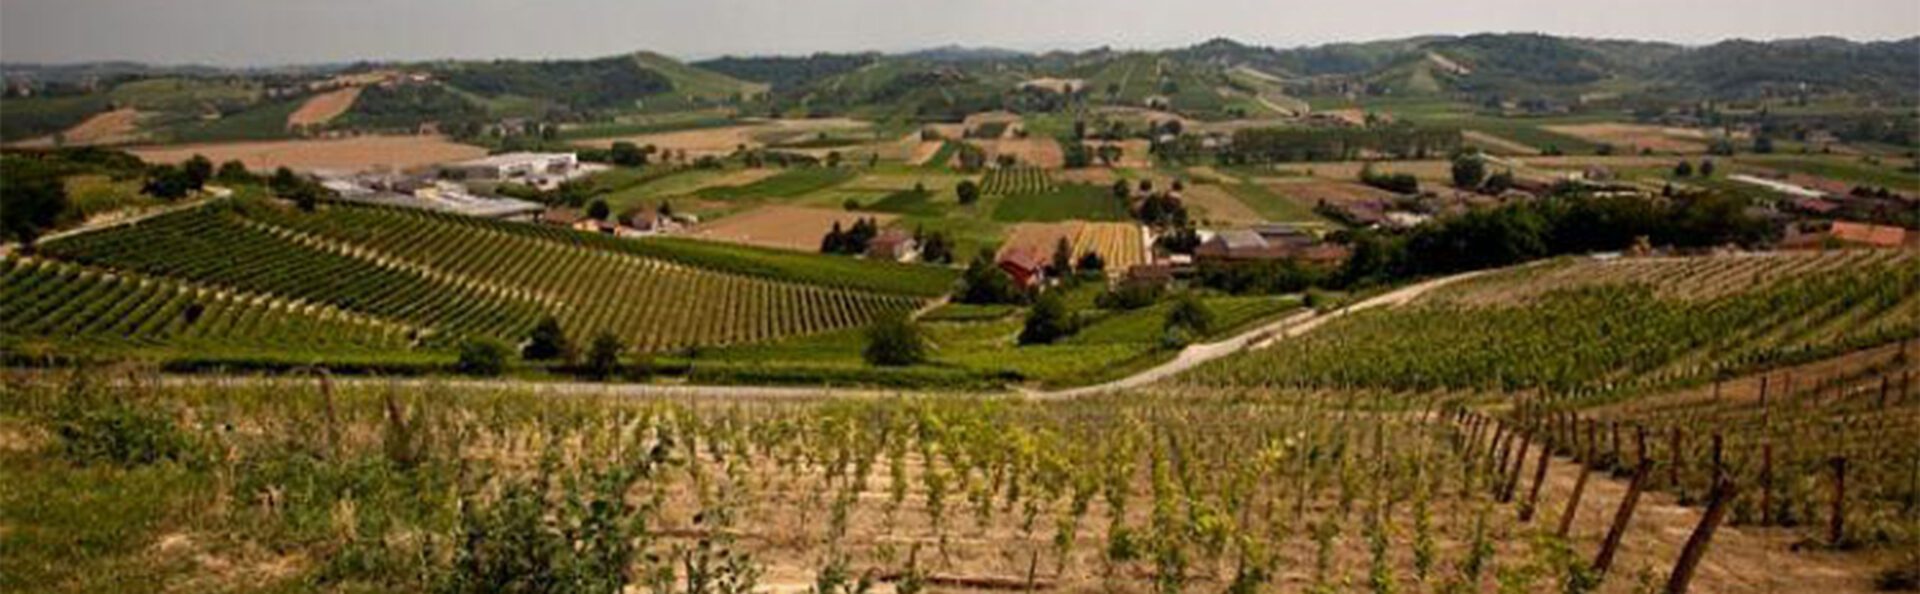 A view of some green hills and vineyards.